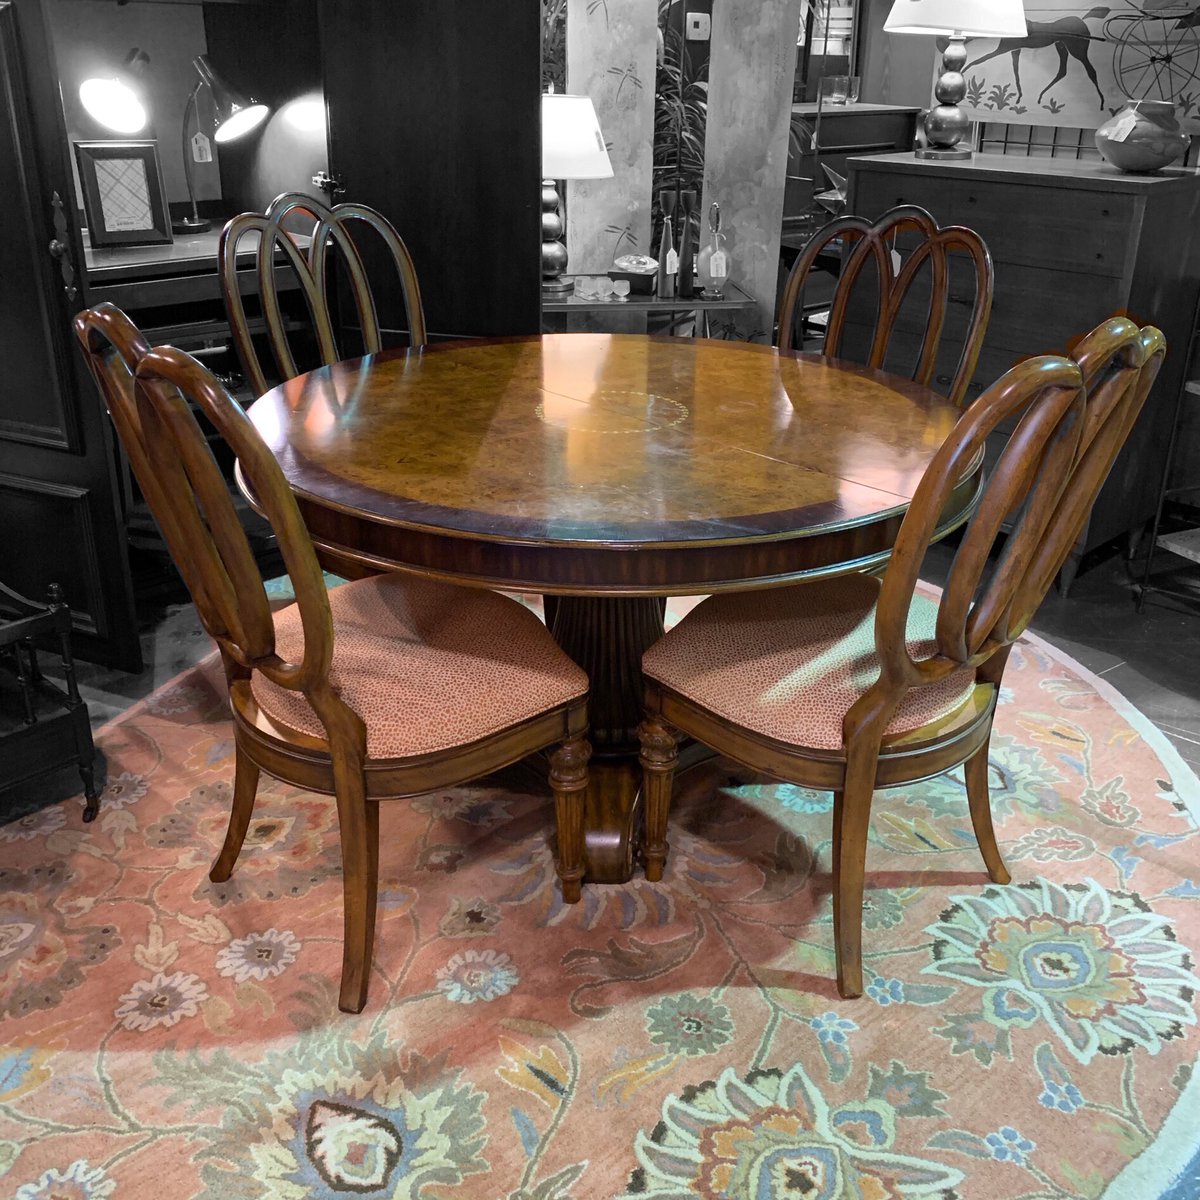 Some beautiful inlay on this table top!  It’s 51” in diameter and comes with these four upholstered chairs.  We have trouble keeping these big round dining tables in stock so don’t wait if you’ve been looking for one. [51x30] #rounddiningtable  #diningset #sohoconsignments